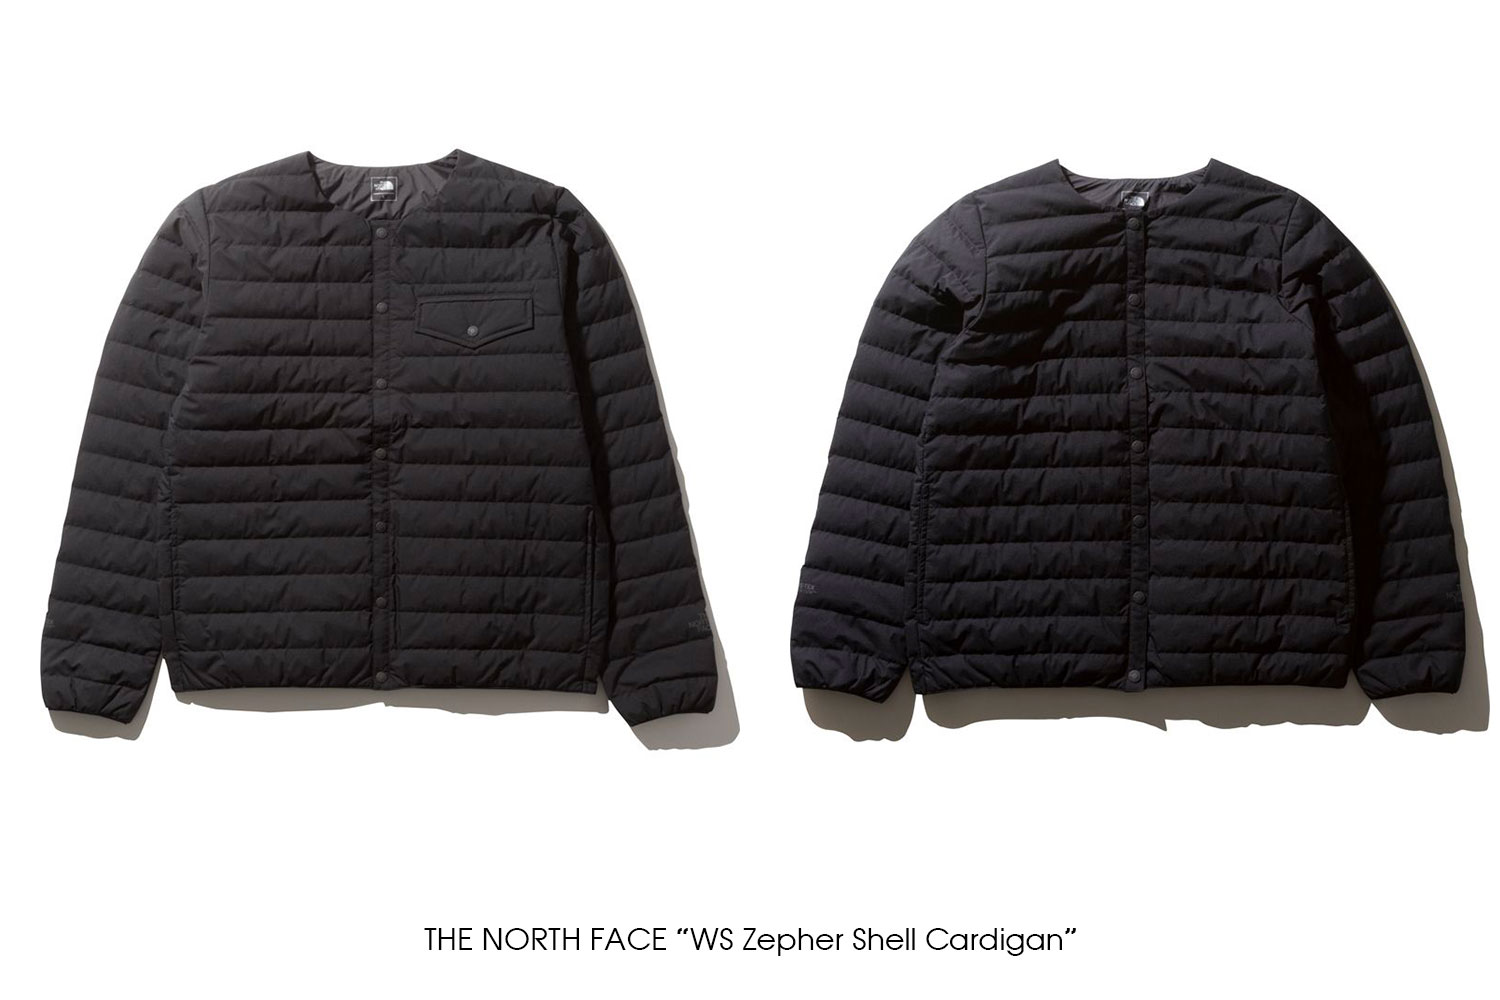 THE NORTH FACE "WS Zepher Shell Cardigan"